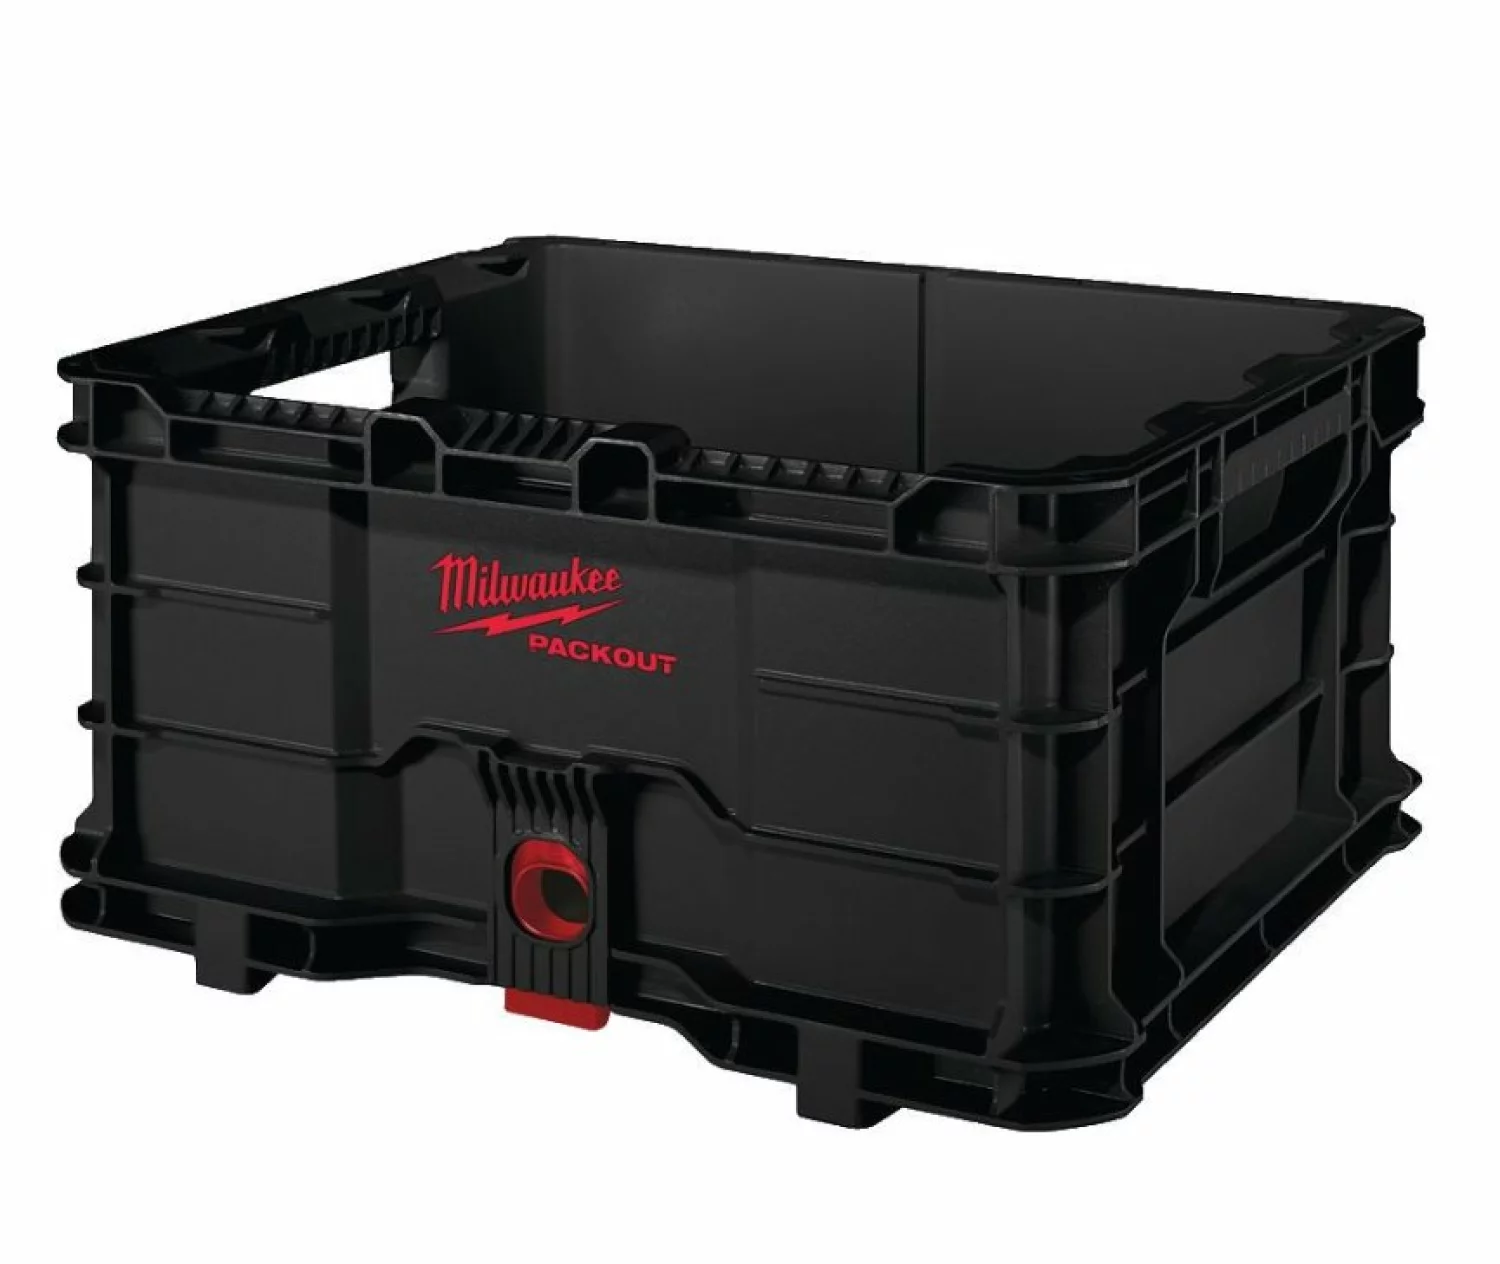 Milwaukee 4932471724 Packout Crate Opbergsysteem - 450 x 390 x 250mm-image